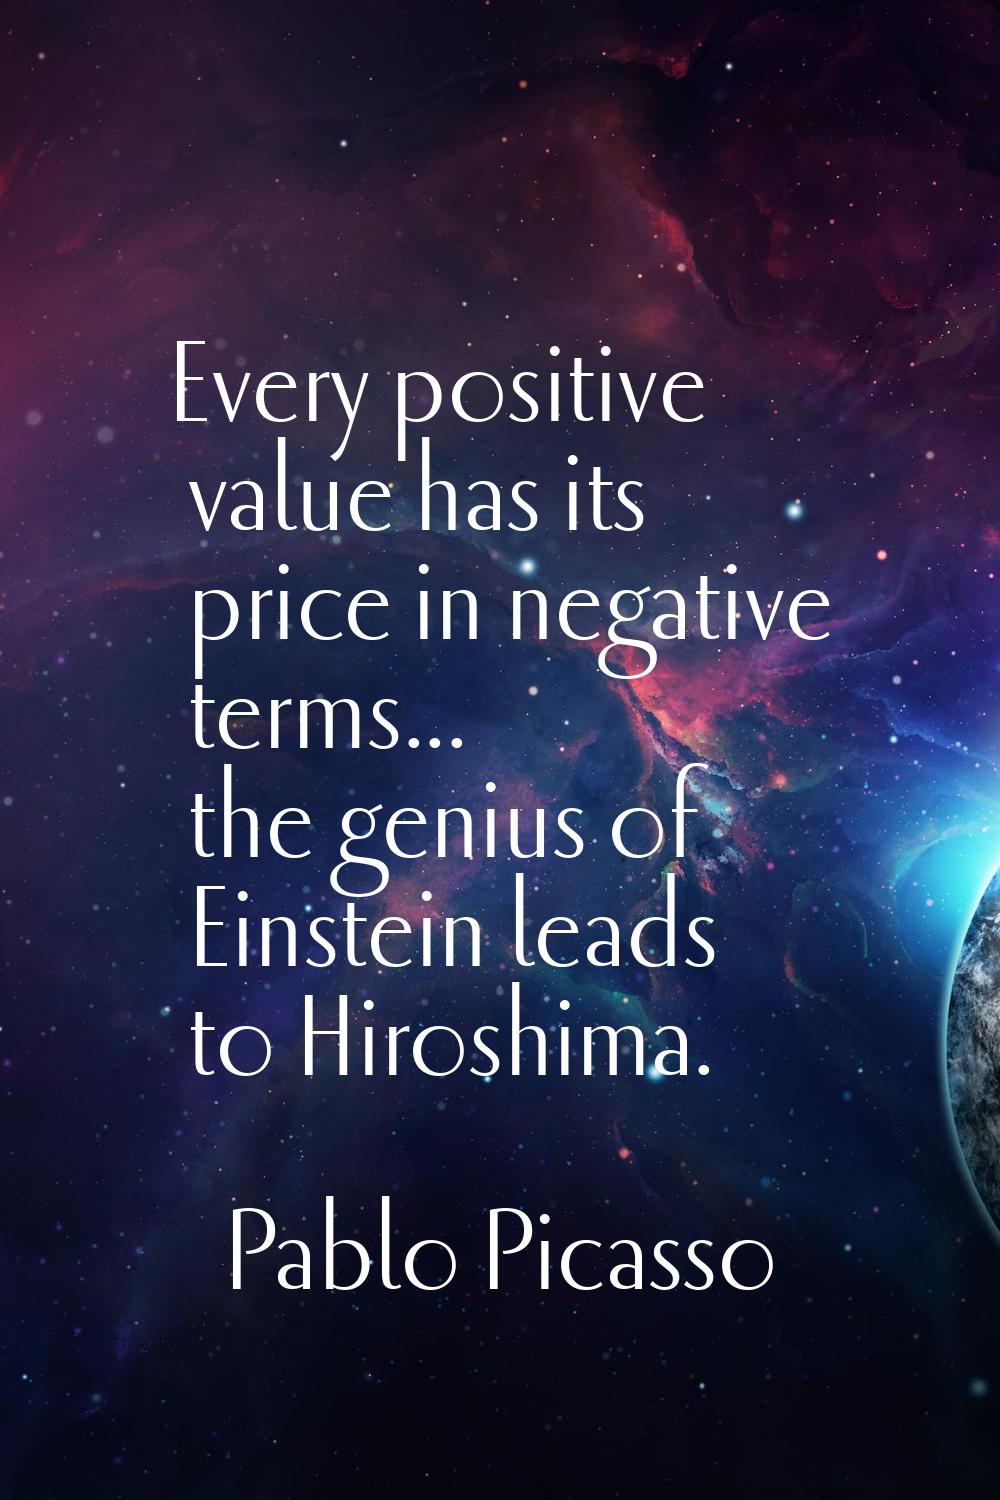 Every positive value has its price in negative terms... the genius of Einstein leads to Hiroshima.